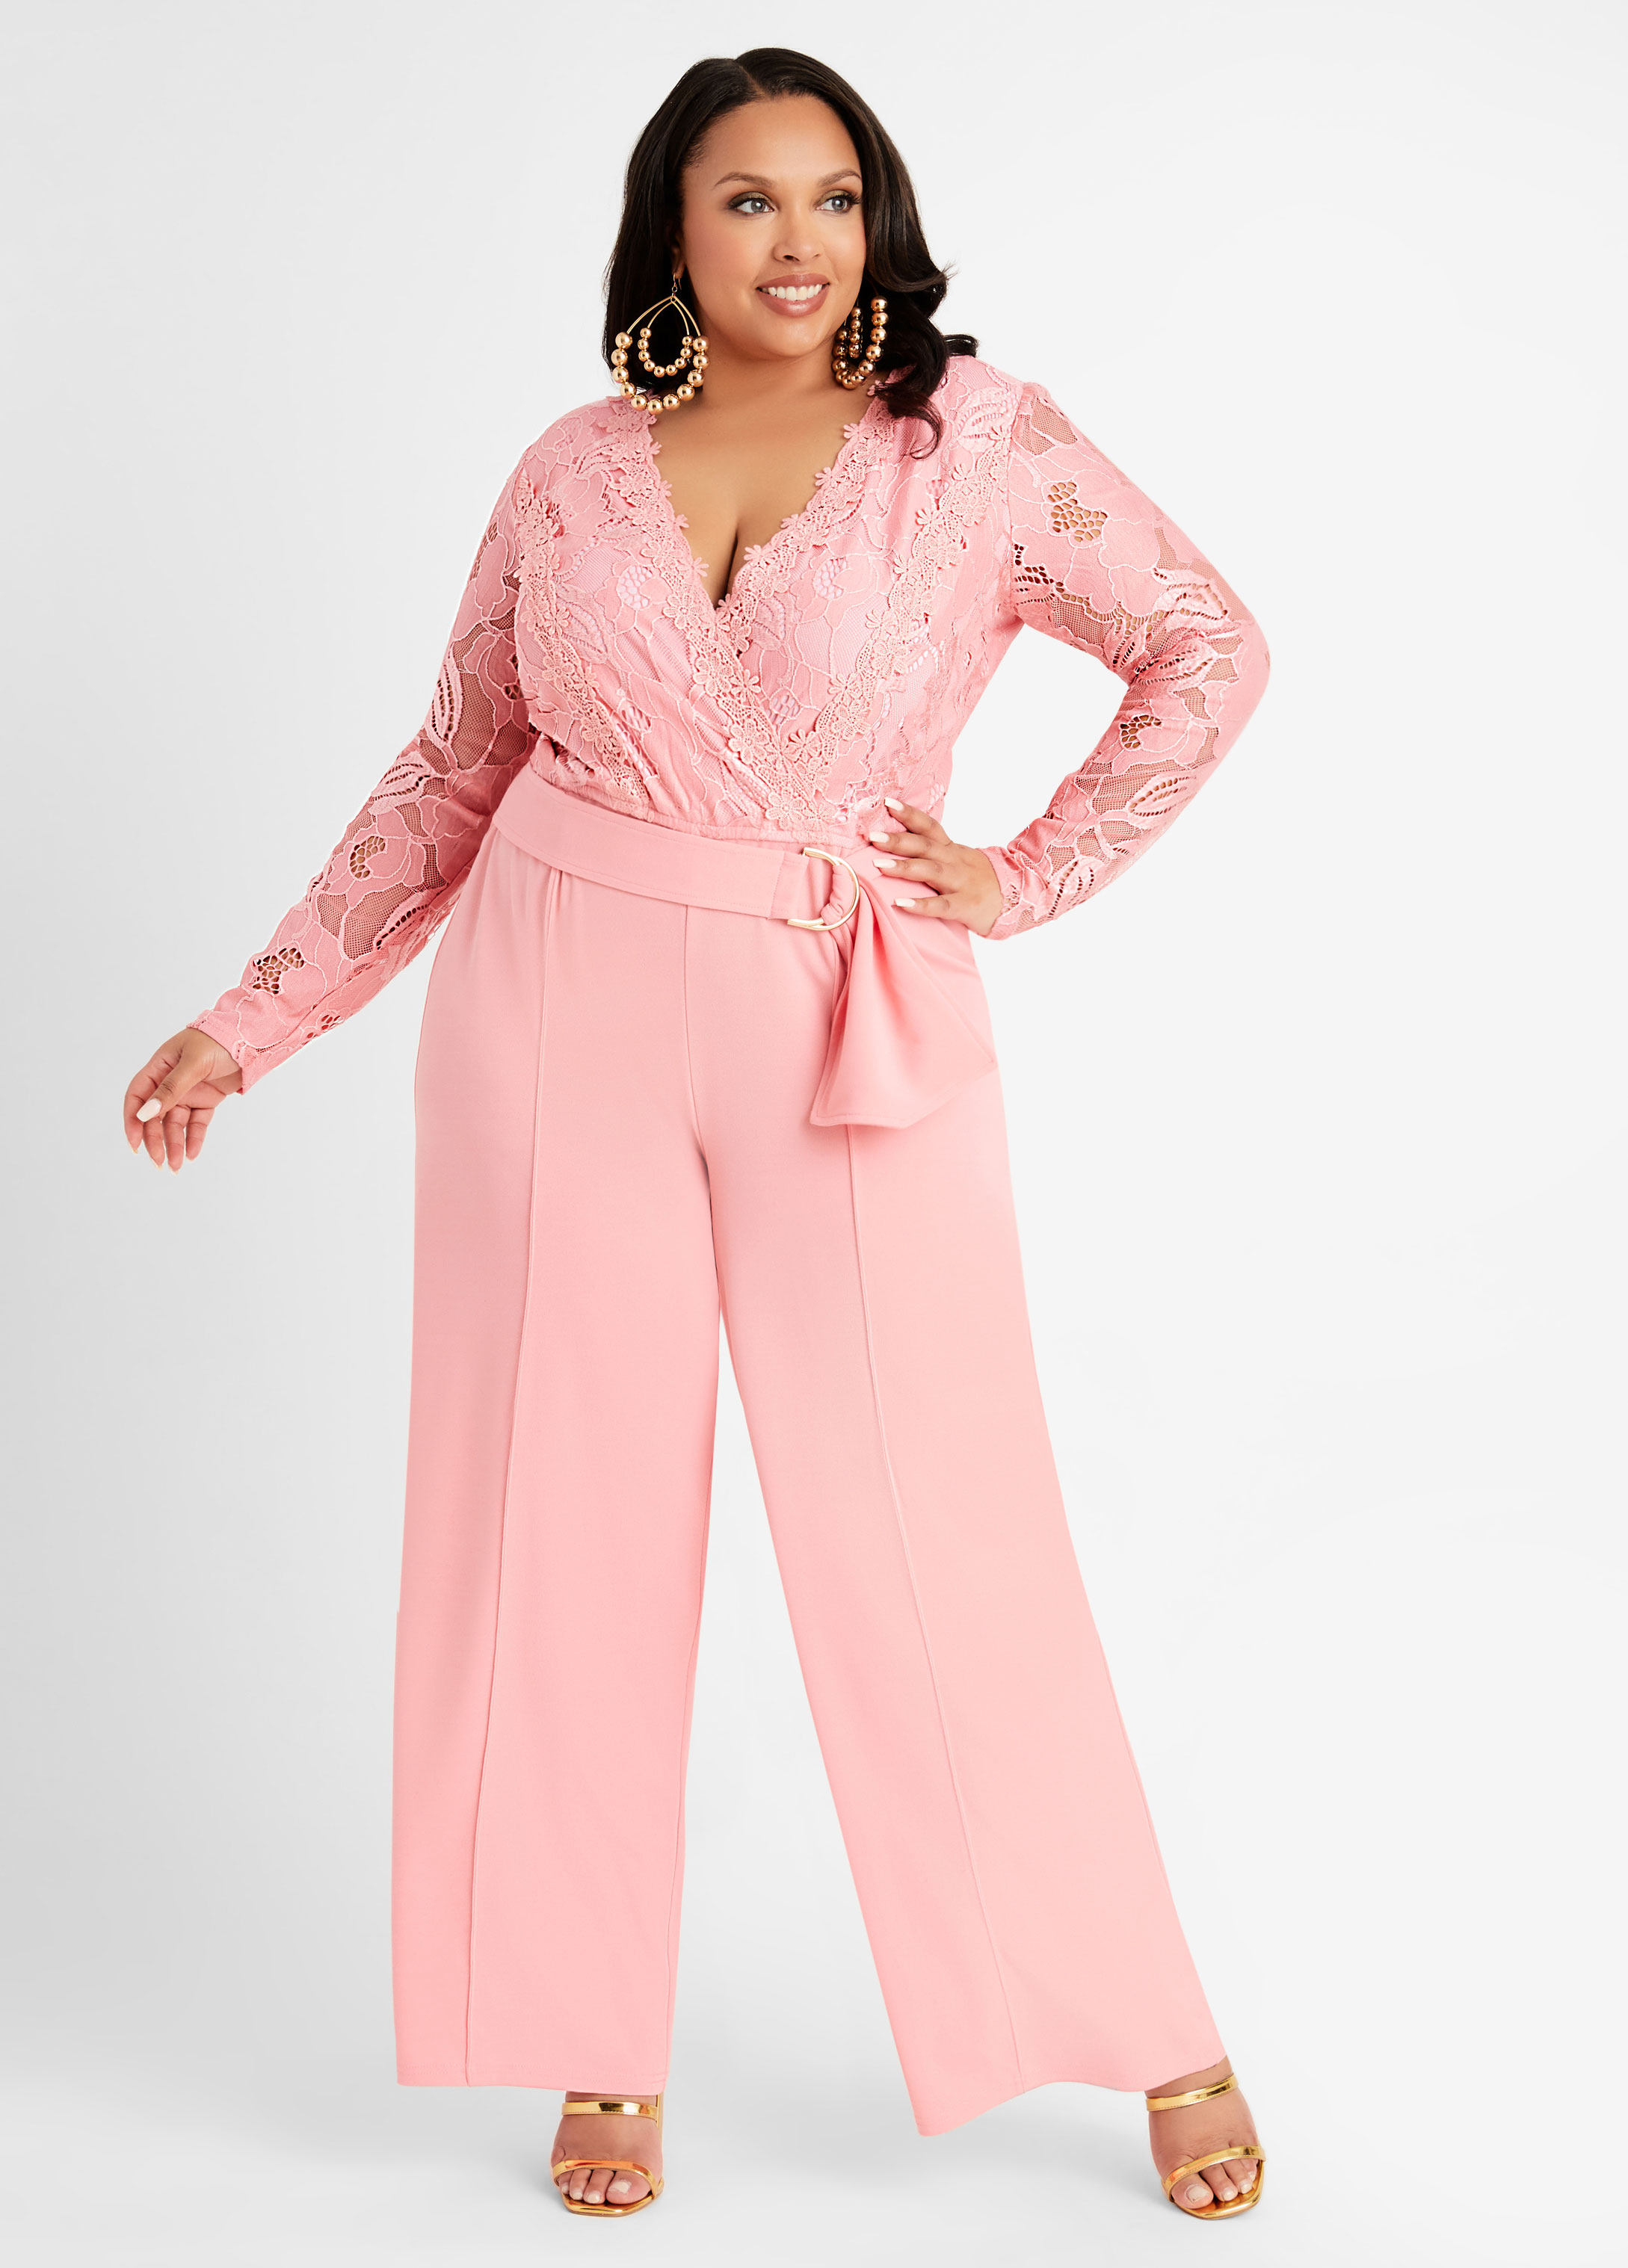 25 Jumpsuits You Could Totally Get Away With Wearing to a Wedding | Jumpsuit  elegant, Jumpsuit for wedding guest, Fashion